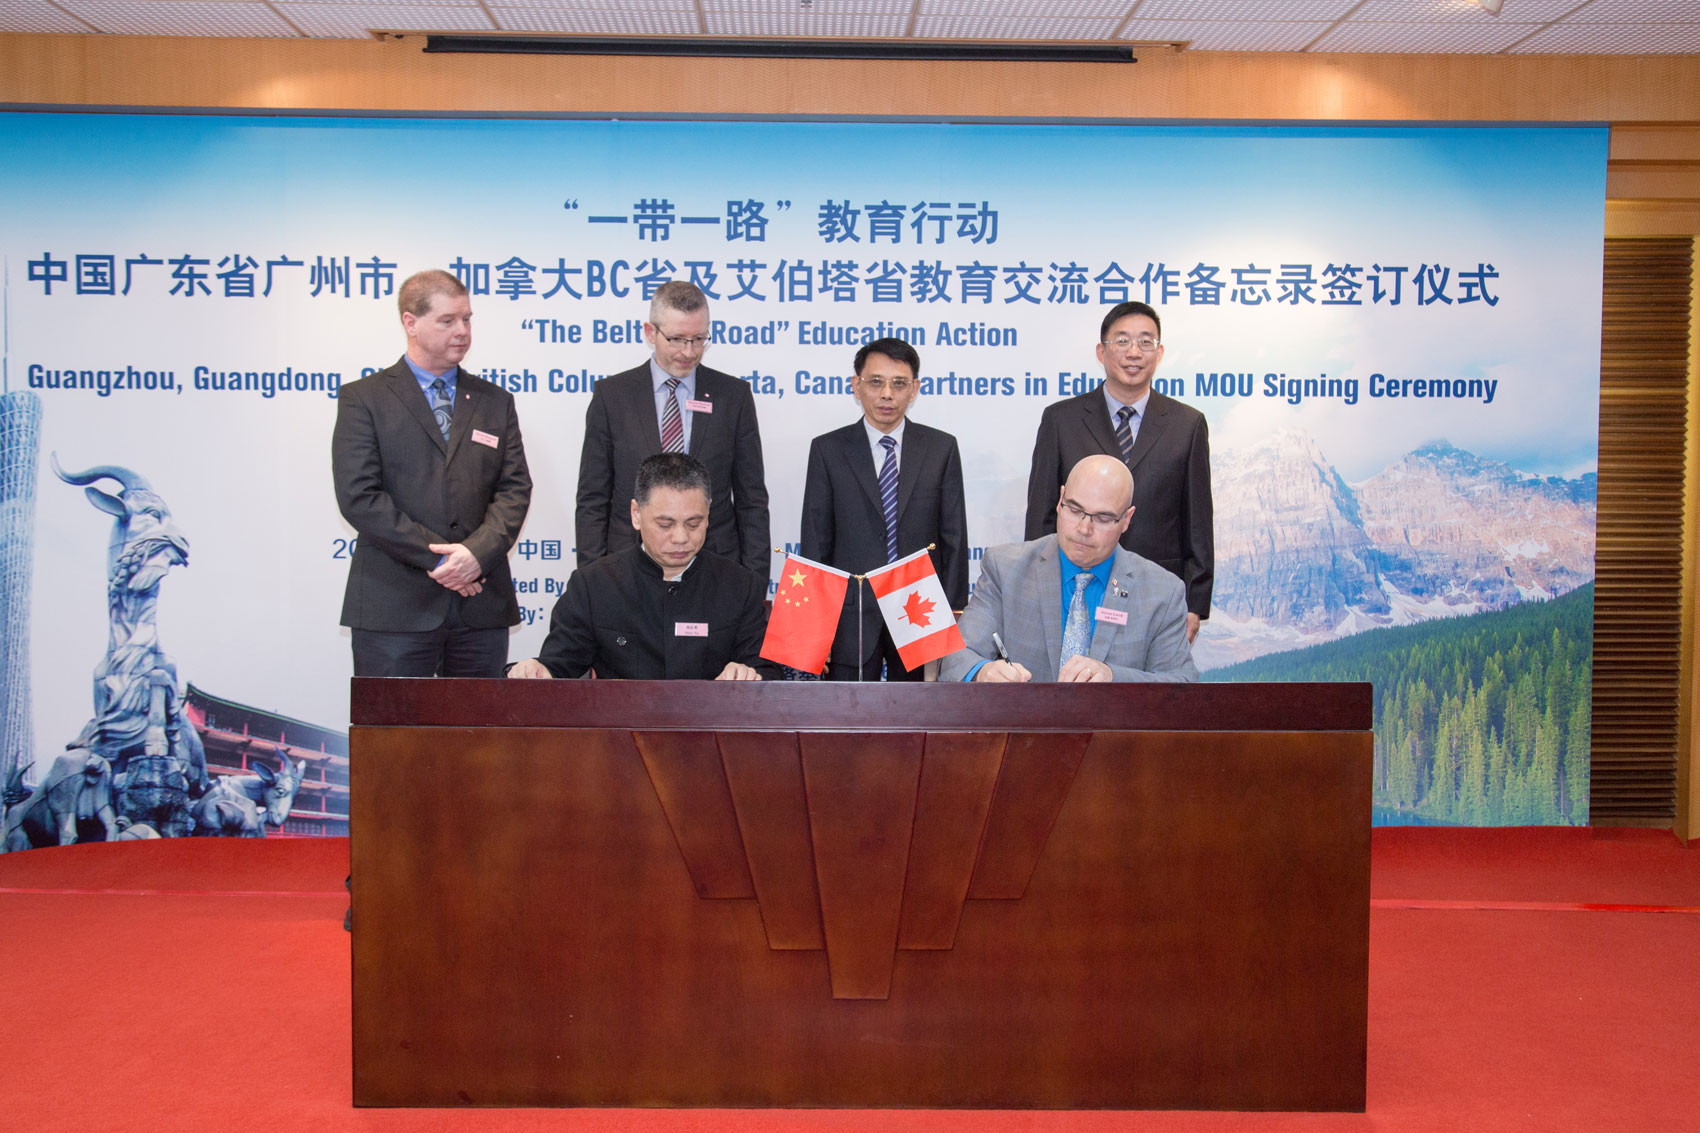 Student and cultural exchange signed by WCPS with region in China